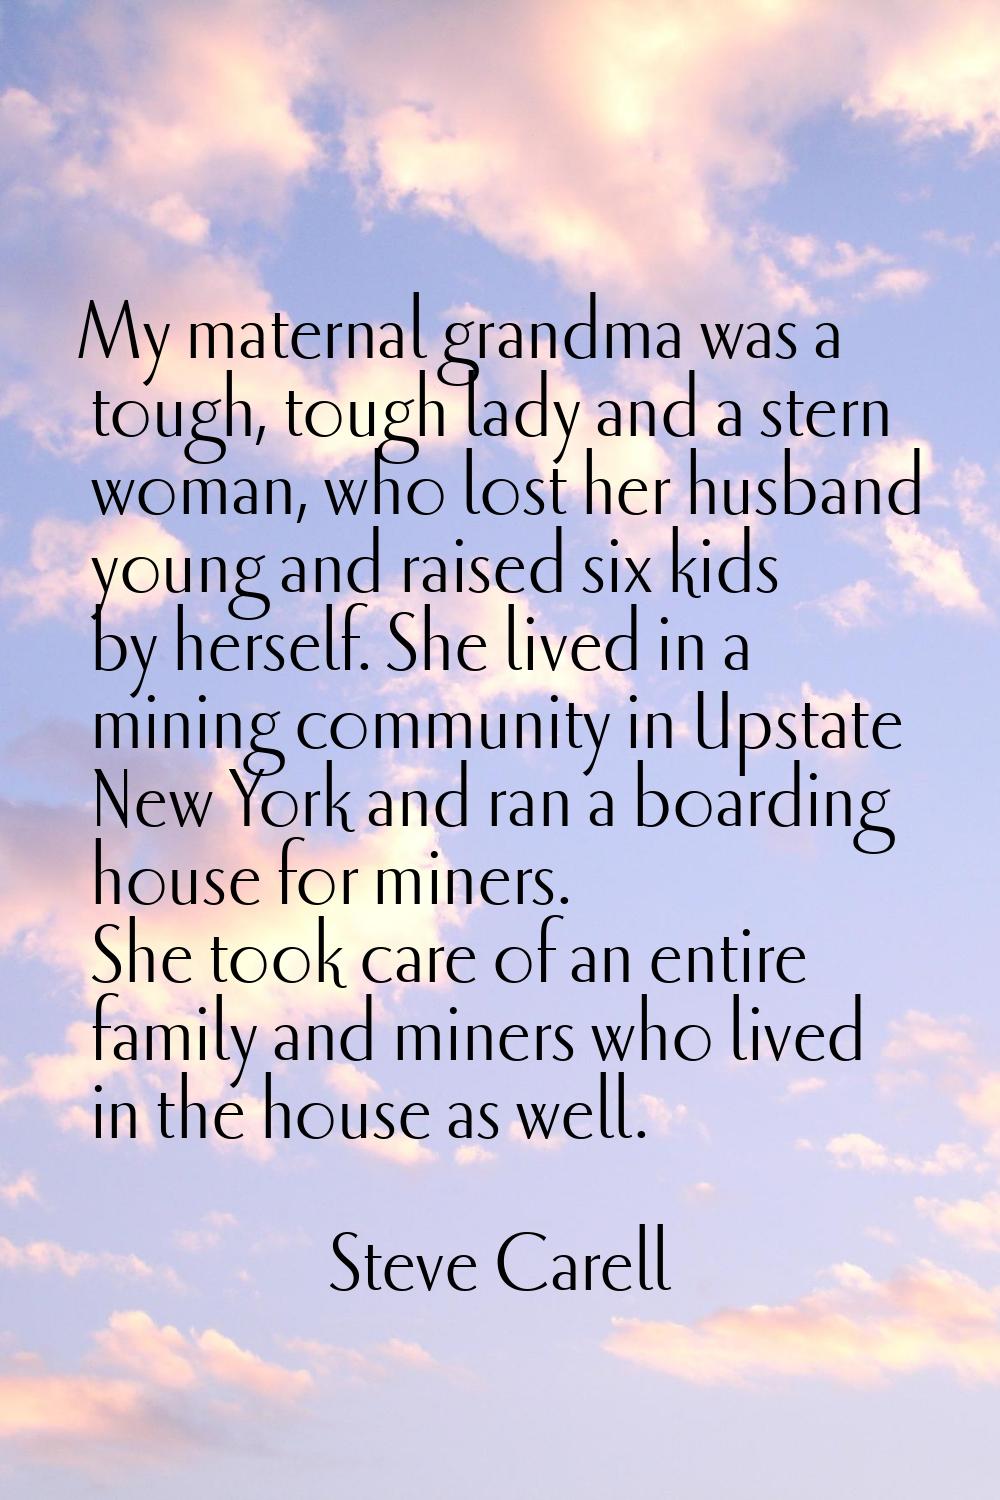 My maternal grandma was a tough, tough lady and a stern woman, who lost her husband young and raise